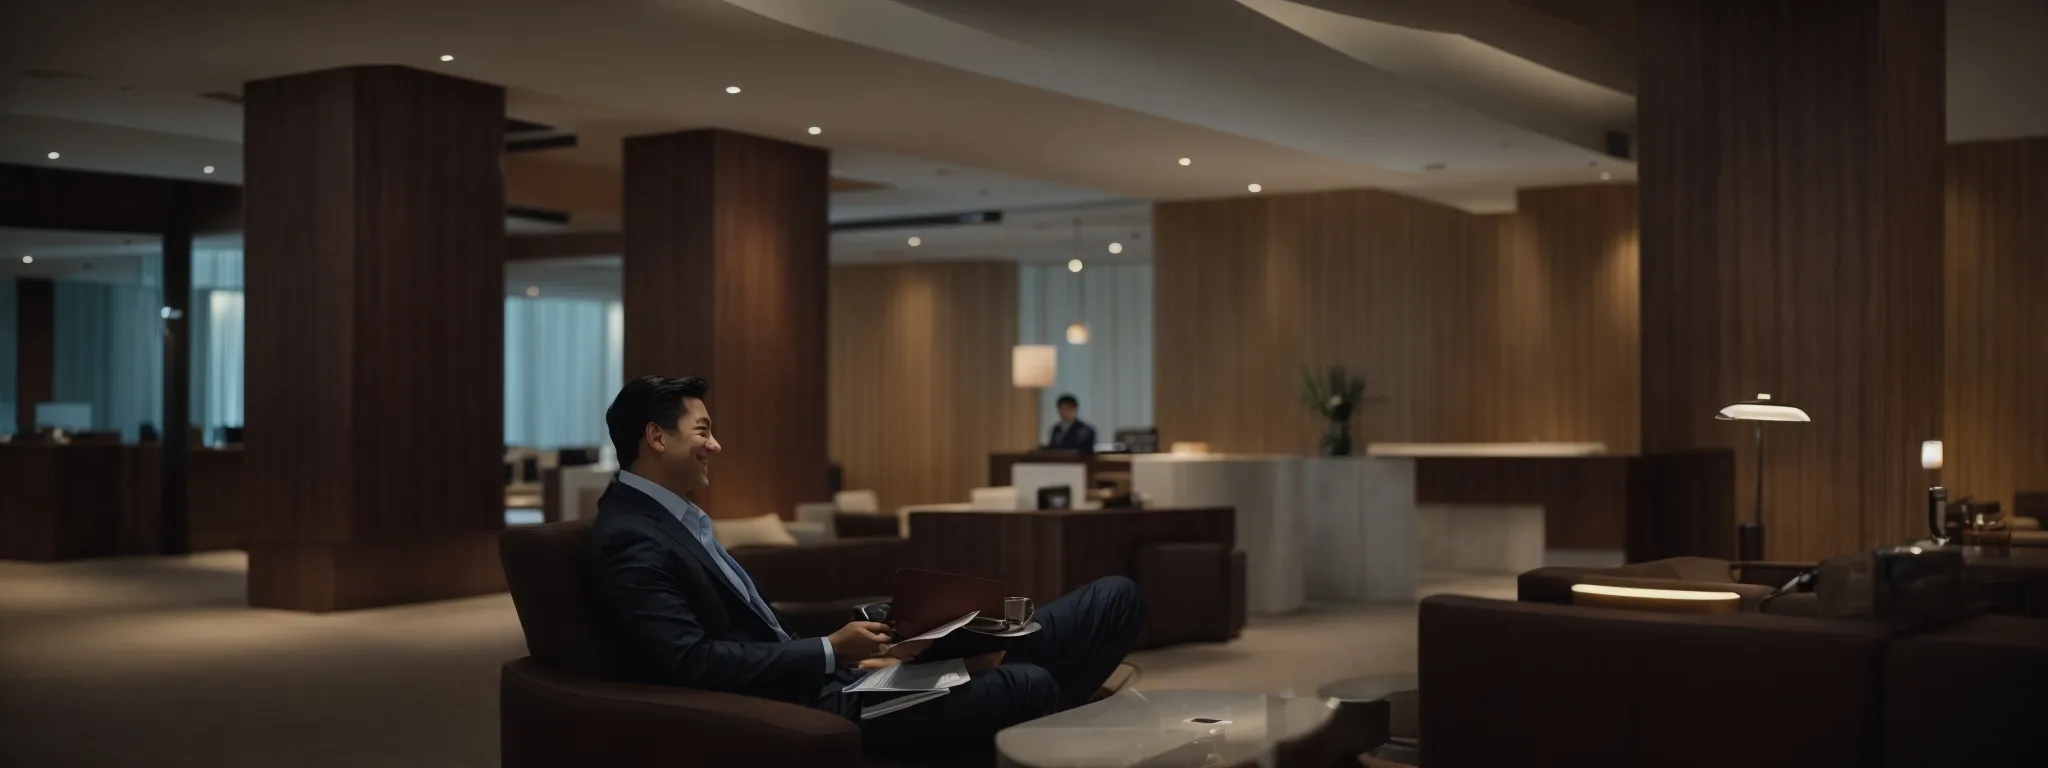 a hotel manager smiling while reading a glowing review on a computer in a modern hotel lobby.